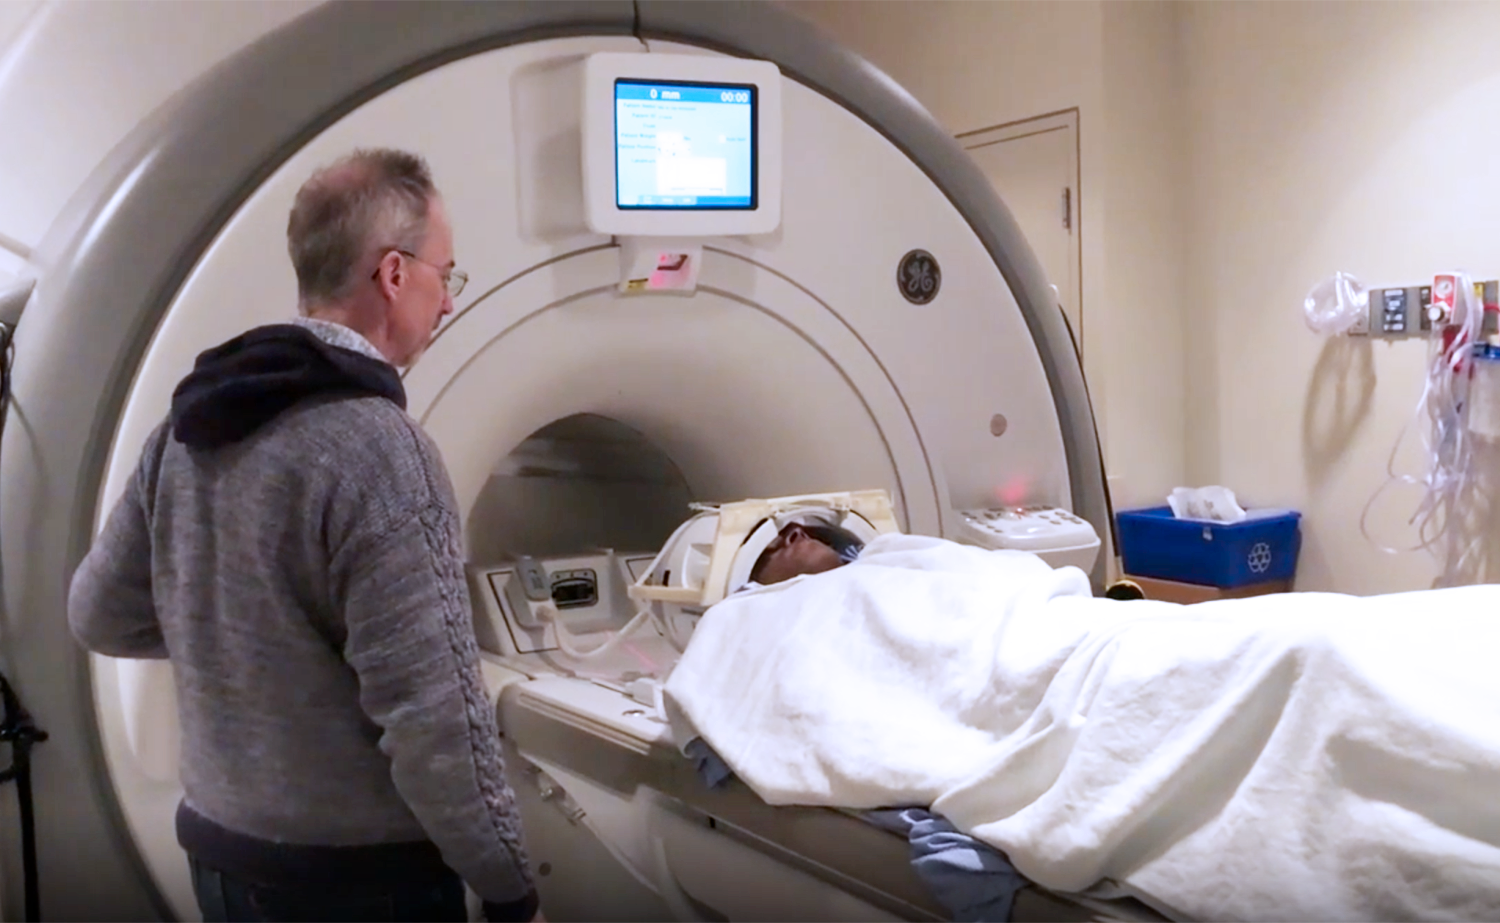 A MRI experiment demonstration by Dr. Michael Noseworthy. (Image provided by Dr. Michael Noseworthy)